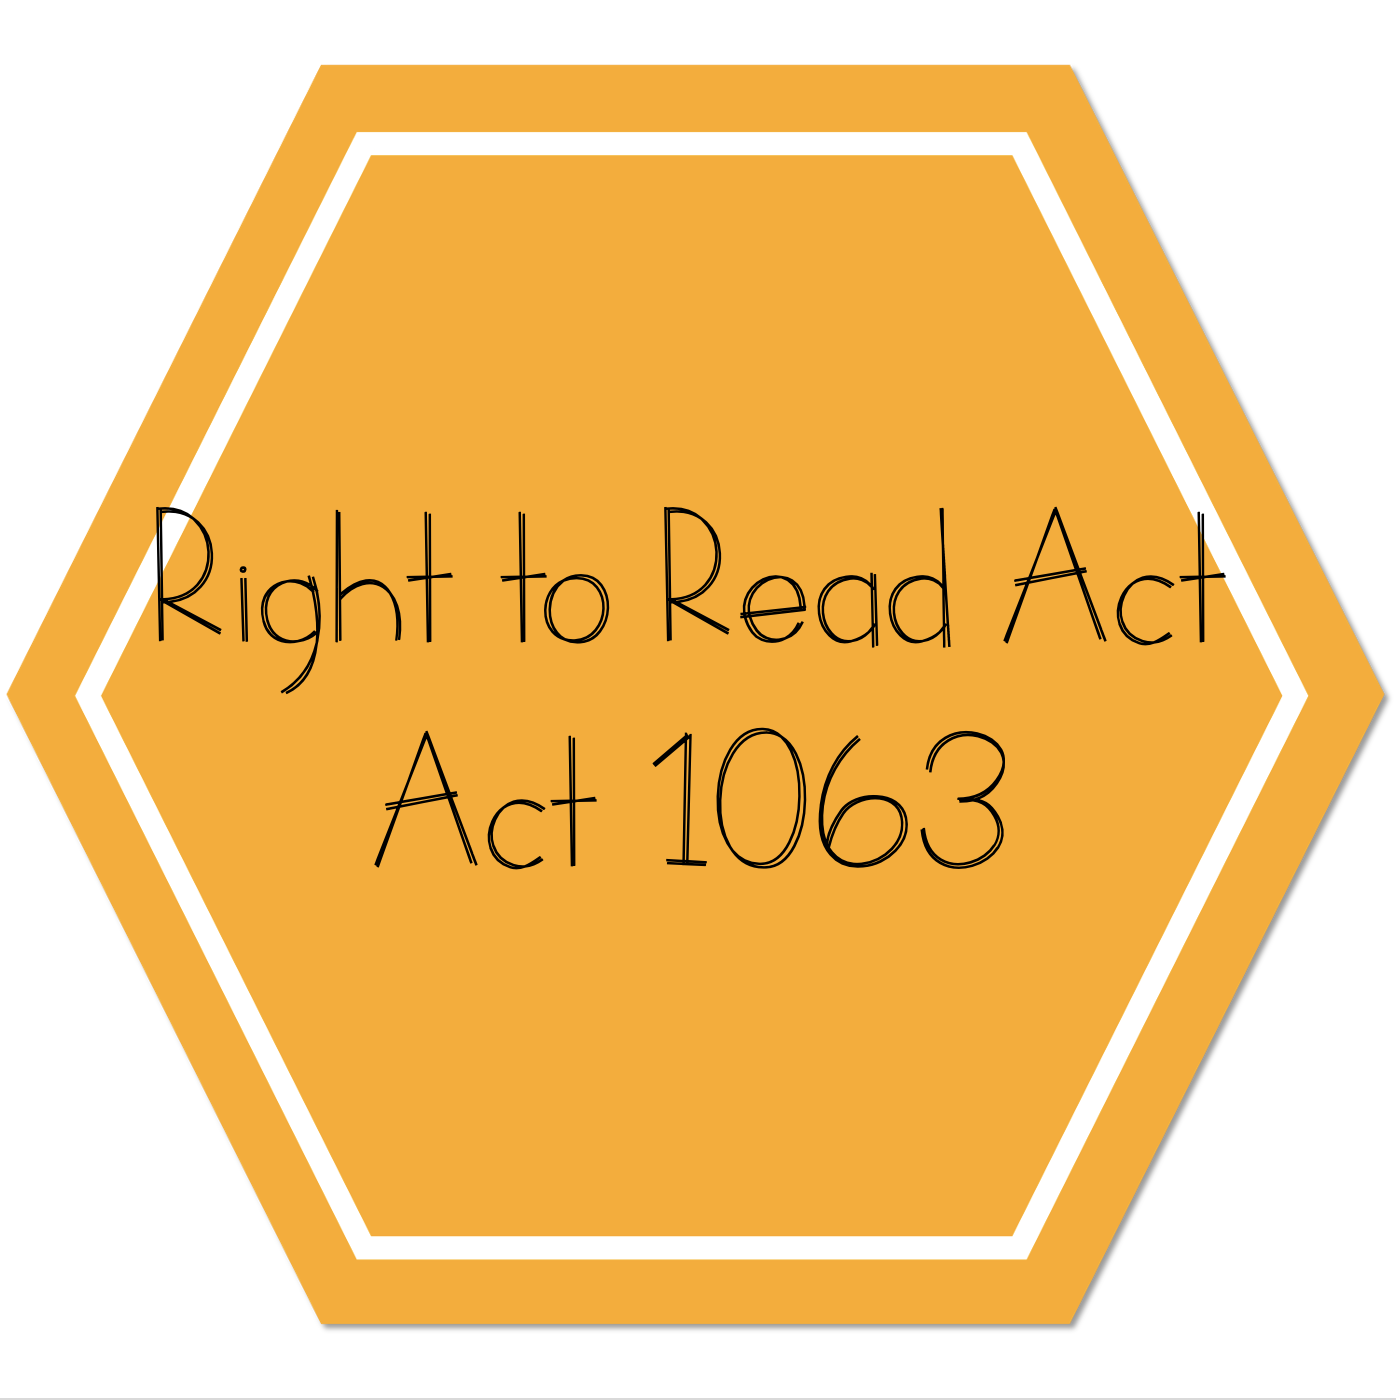 Right to Read Act